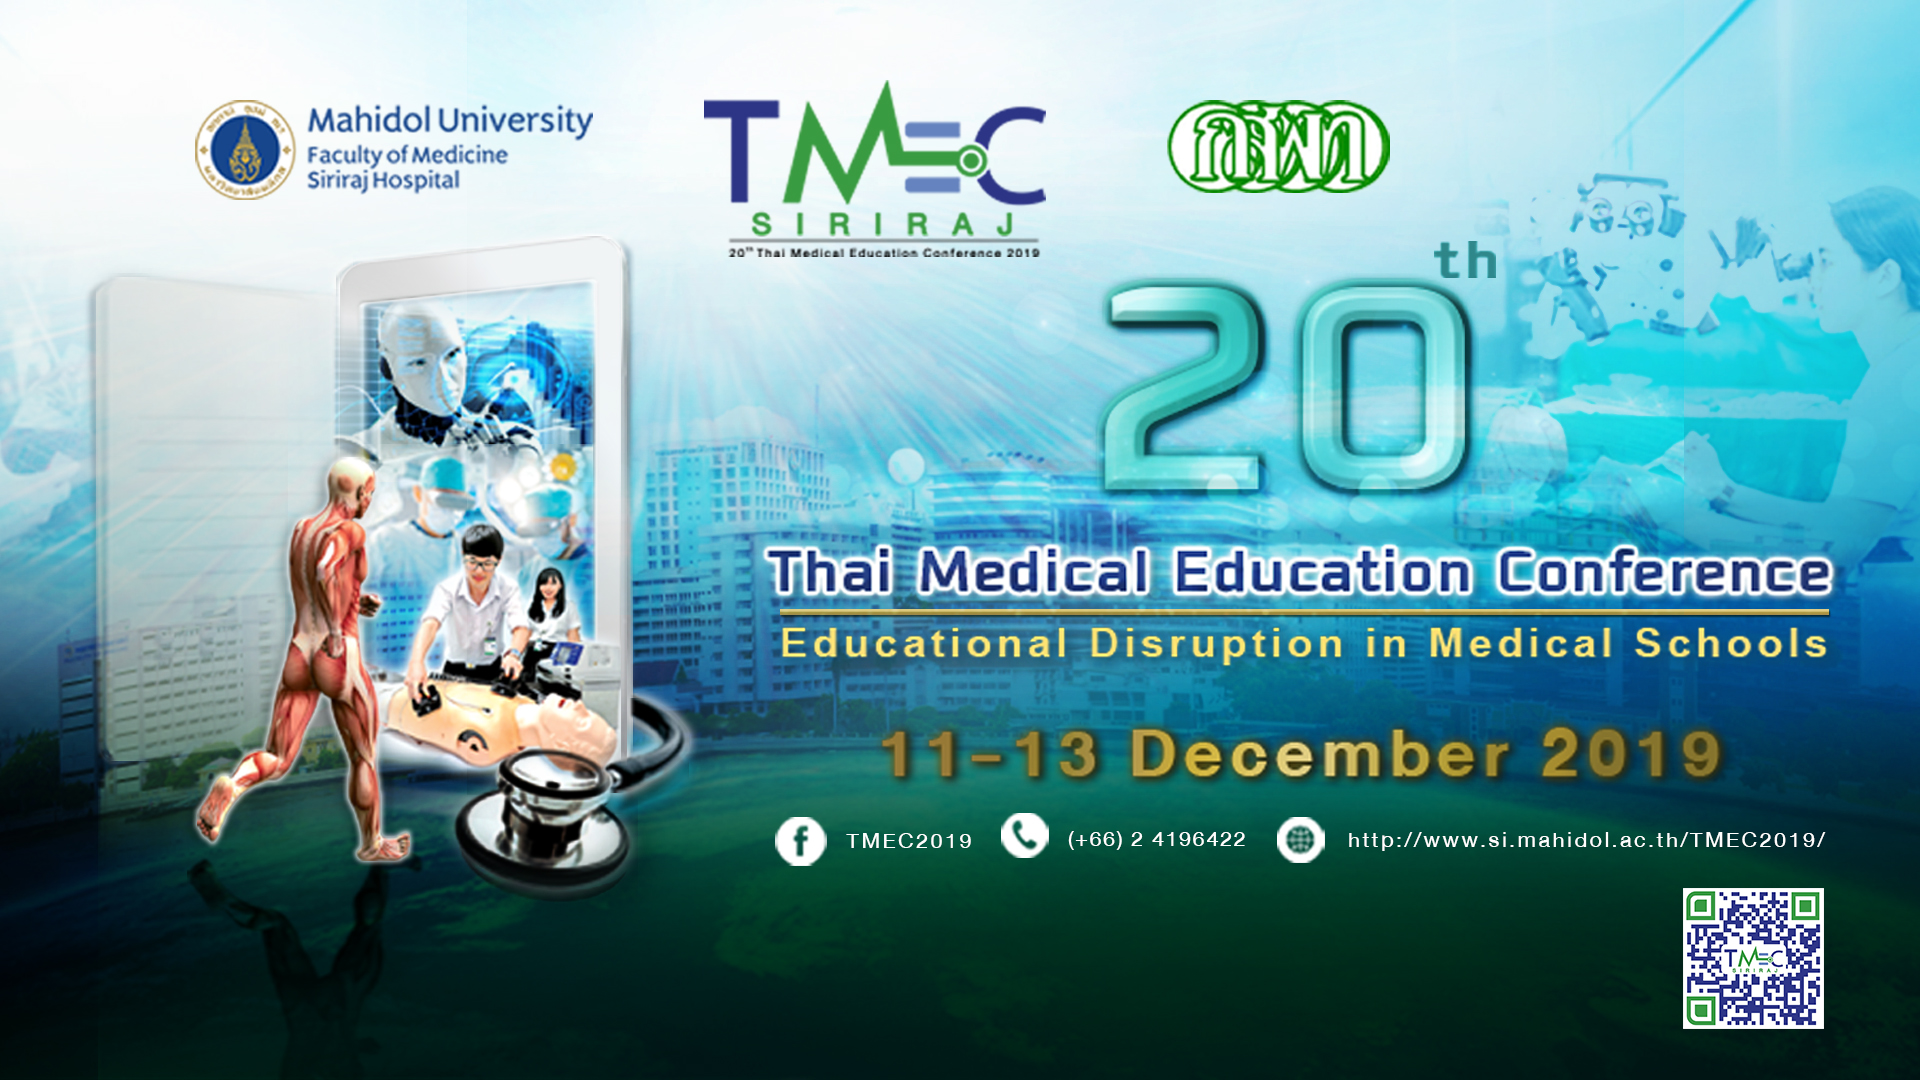 The 20th Thai Medical Education Conference